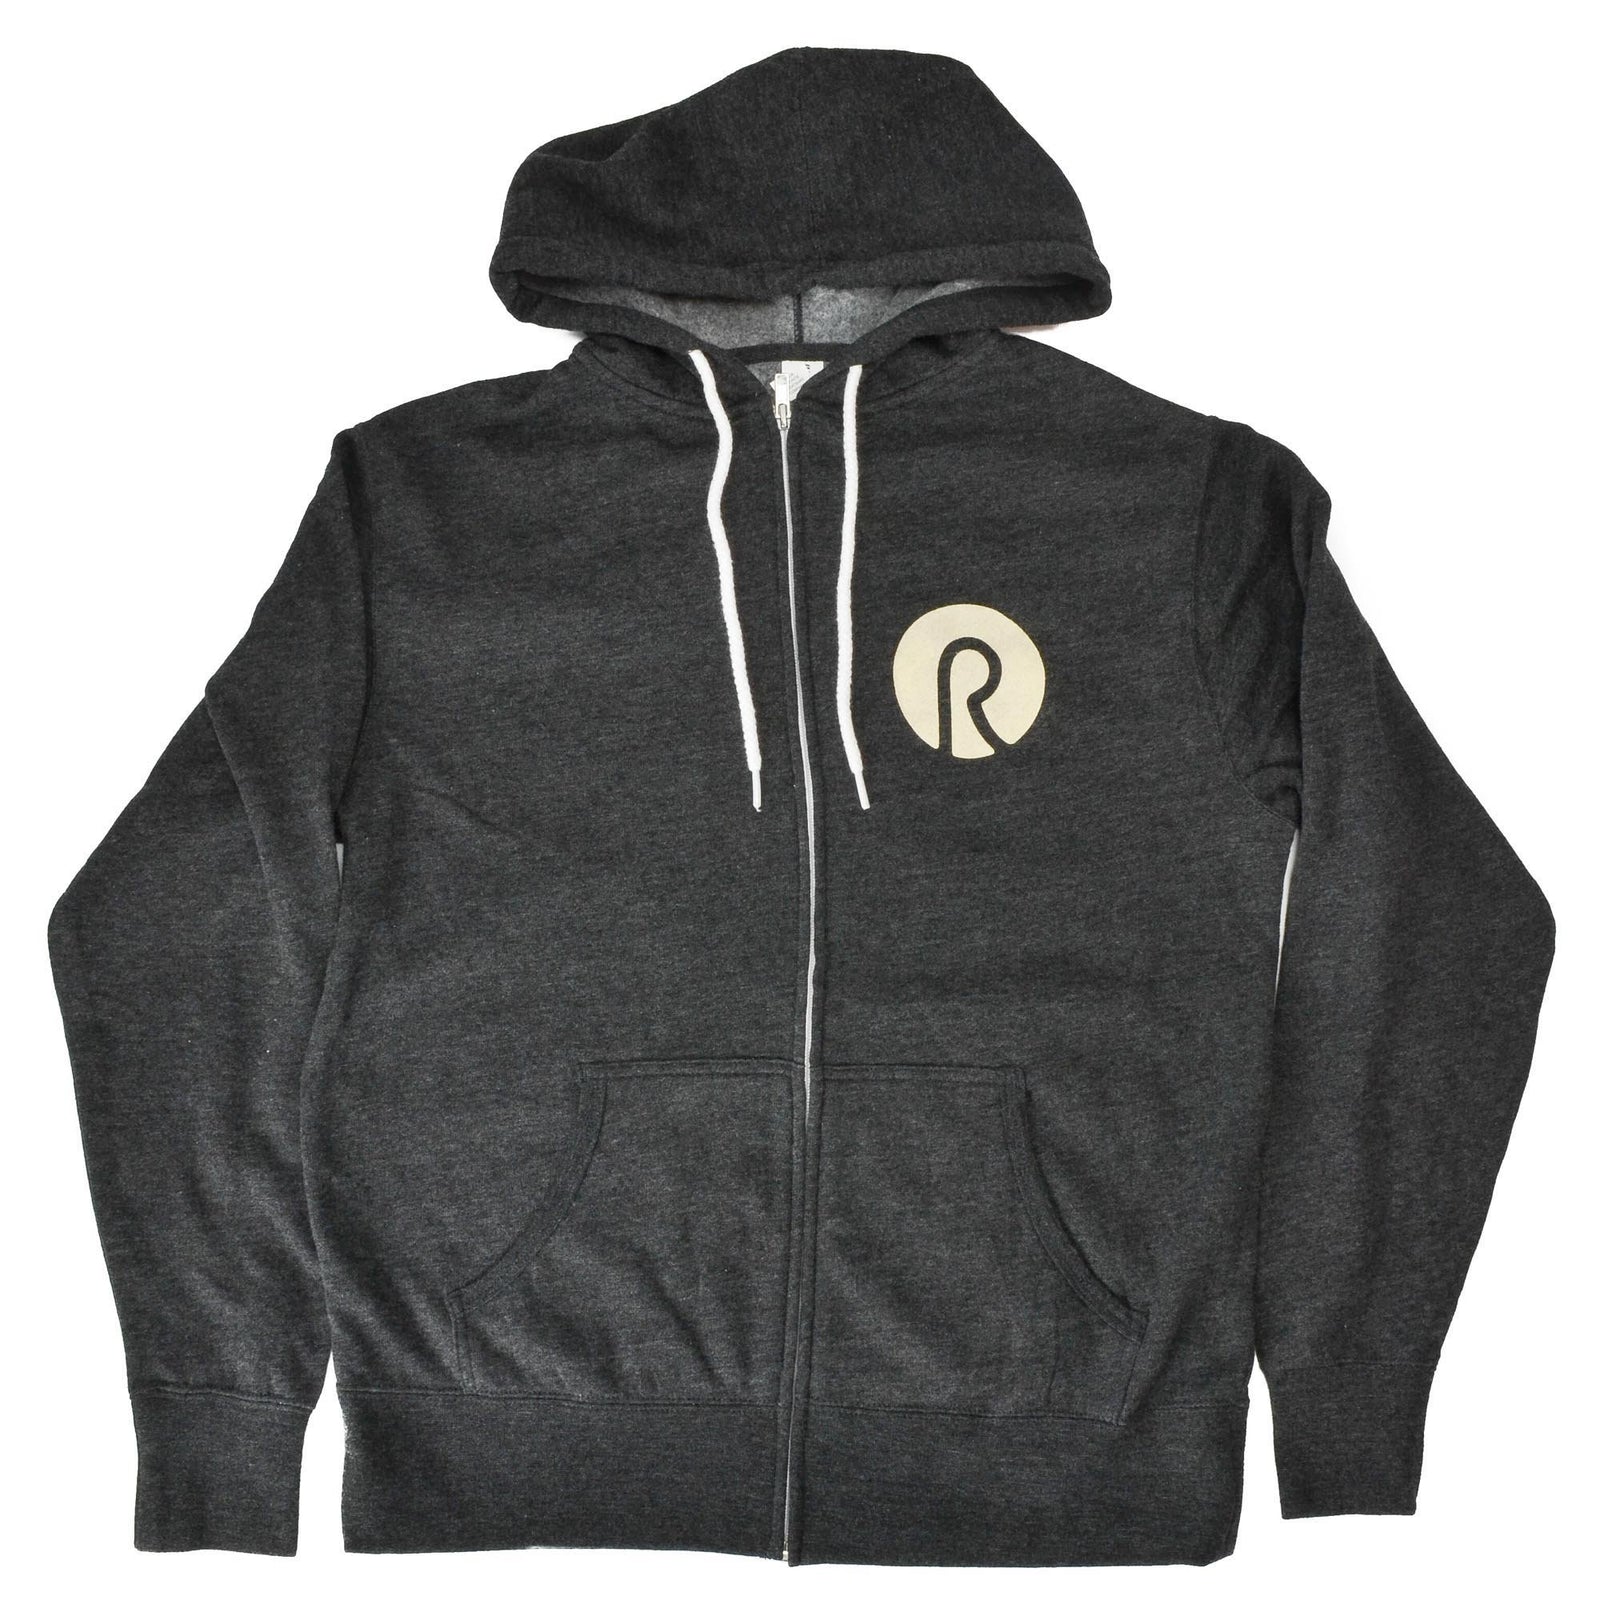 Russo Music Asbury Park 1960 Logo Hoodie - Charcoal Heather